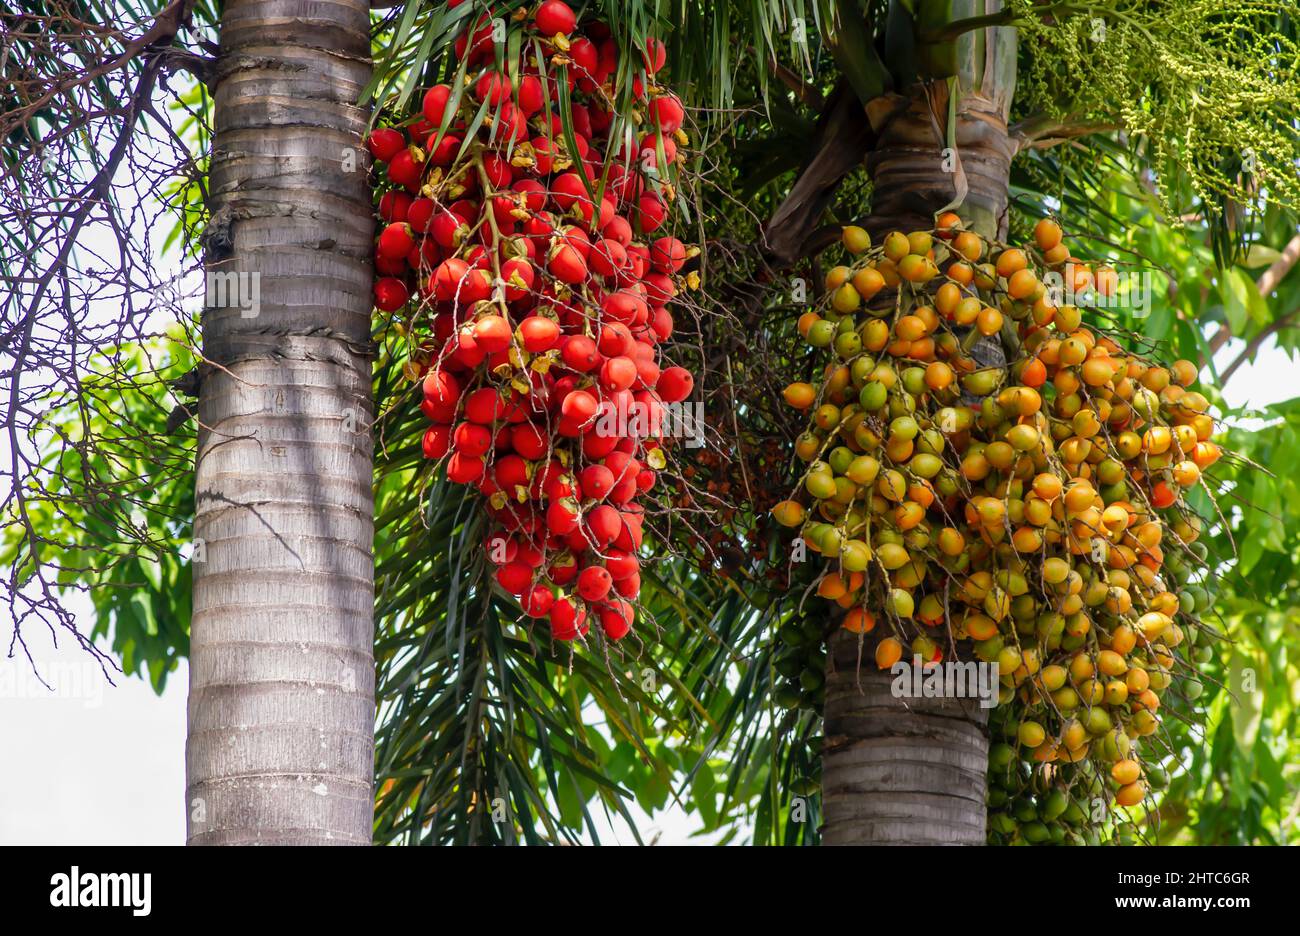 Red and brown Areca nut palm, Betel Nuts, Betel palm (Areca catechu) hanging on its tree Stock Photo